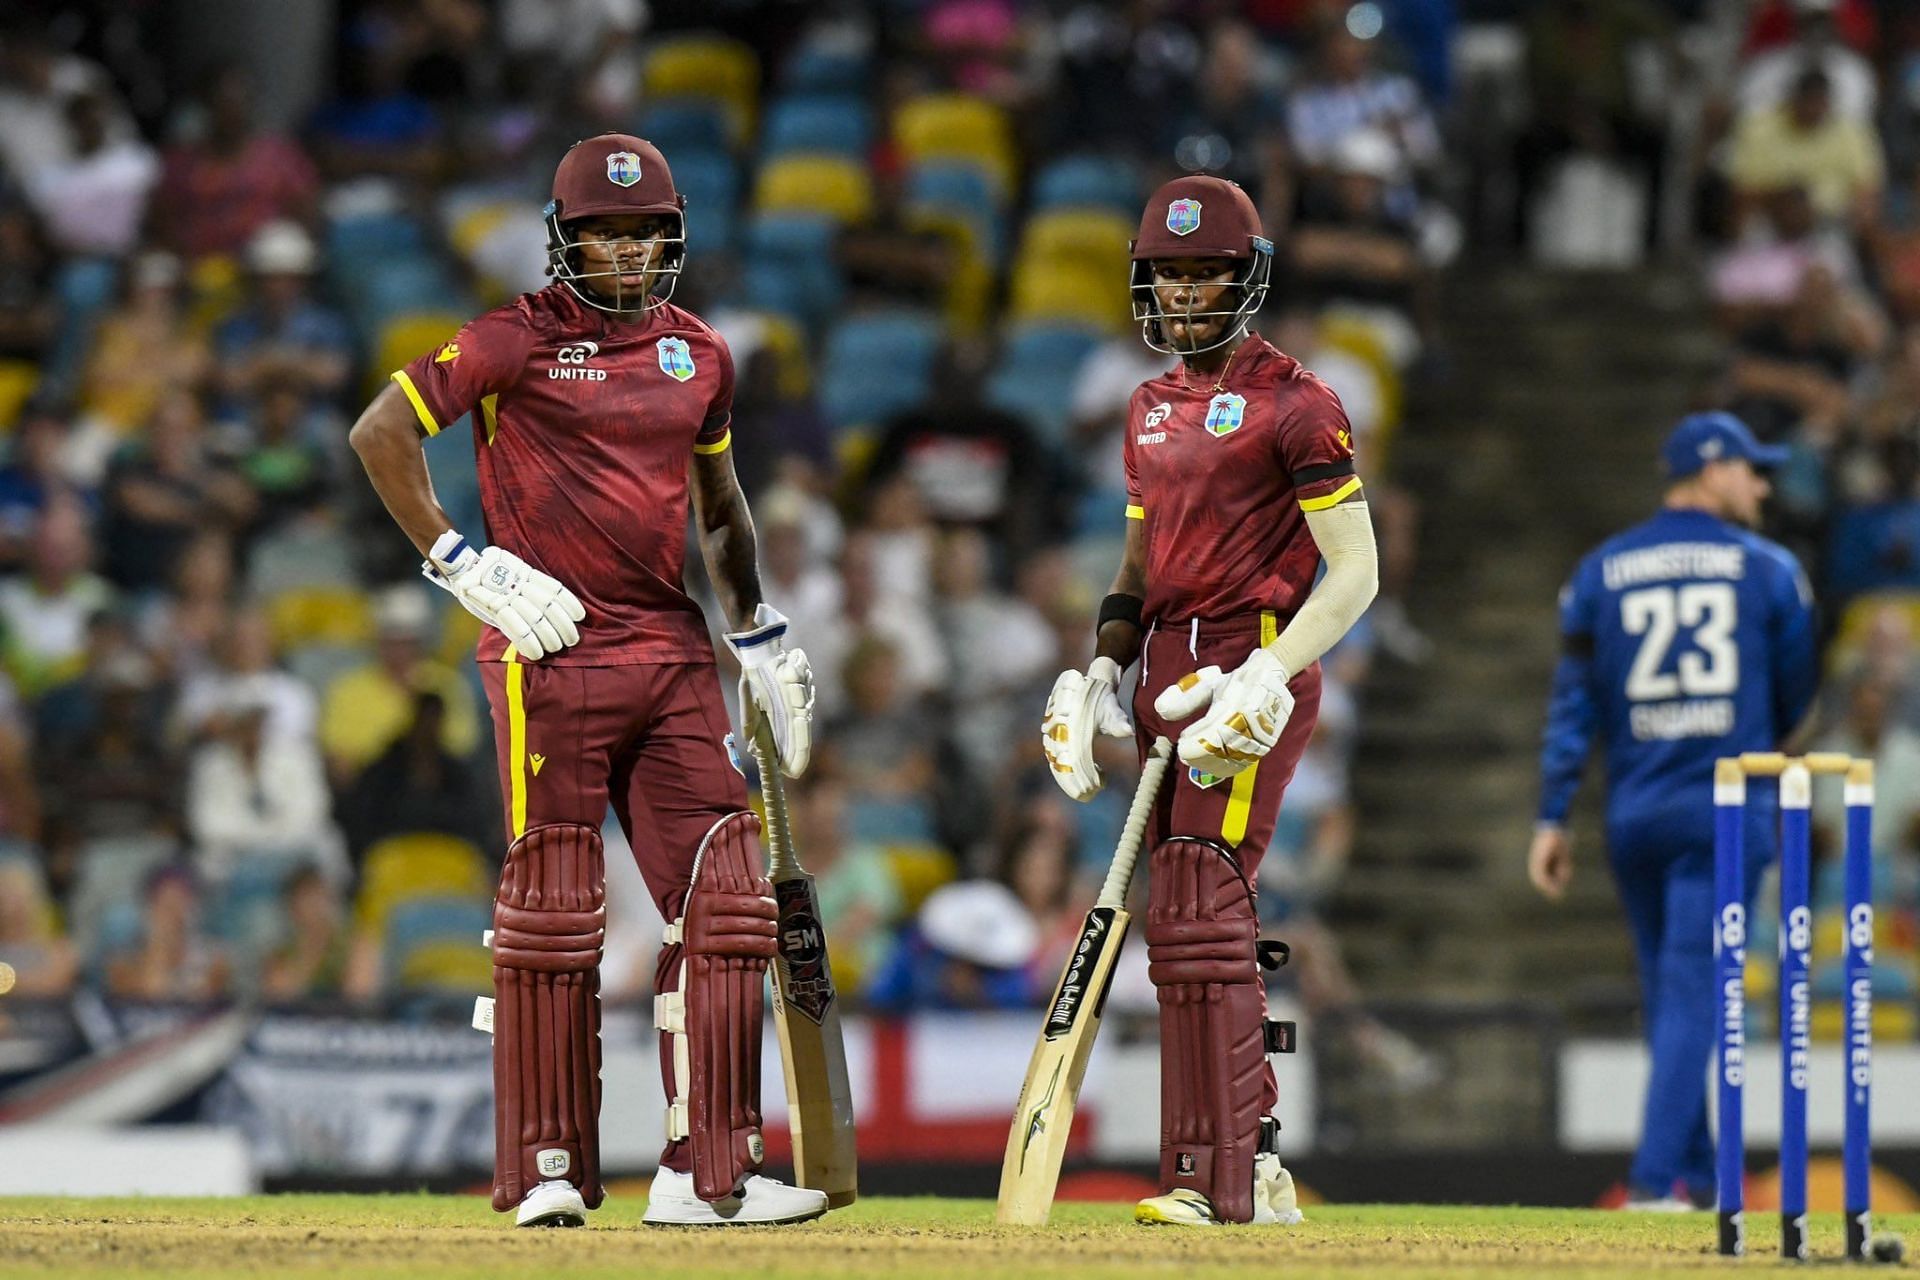 West Indies Cricketers in action. (Photo Credits: Cricket West Indies)